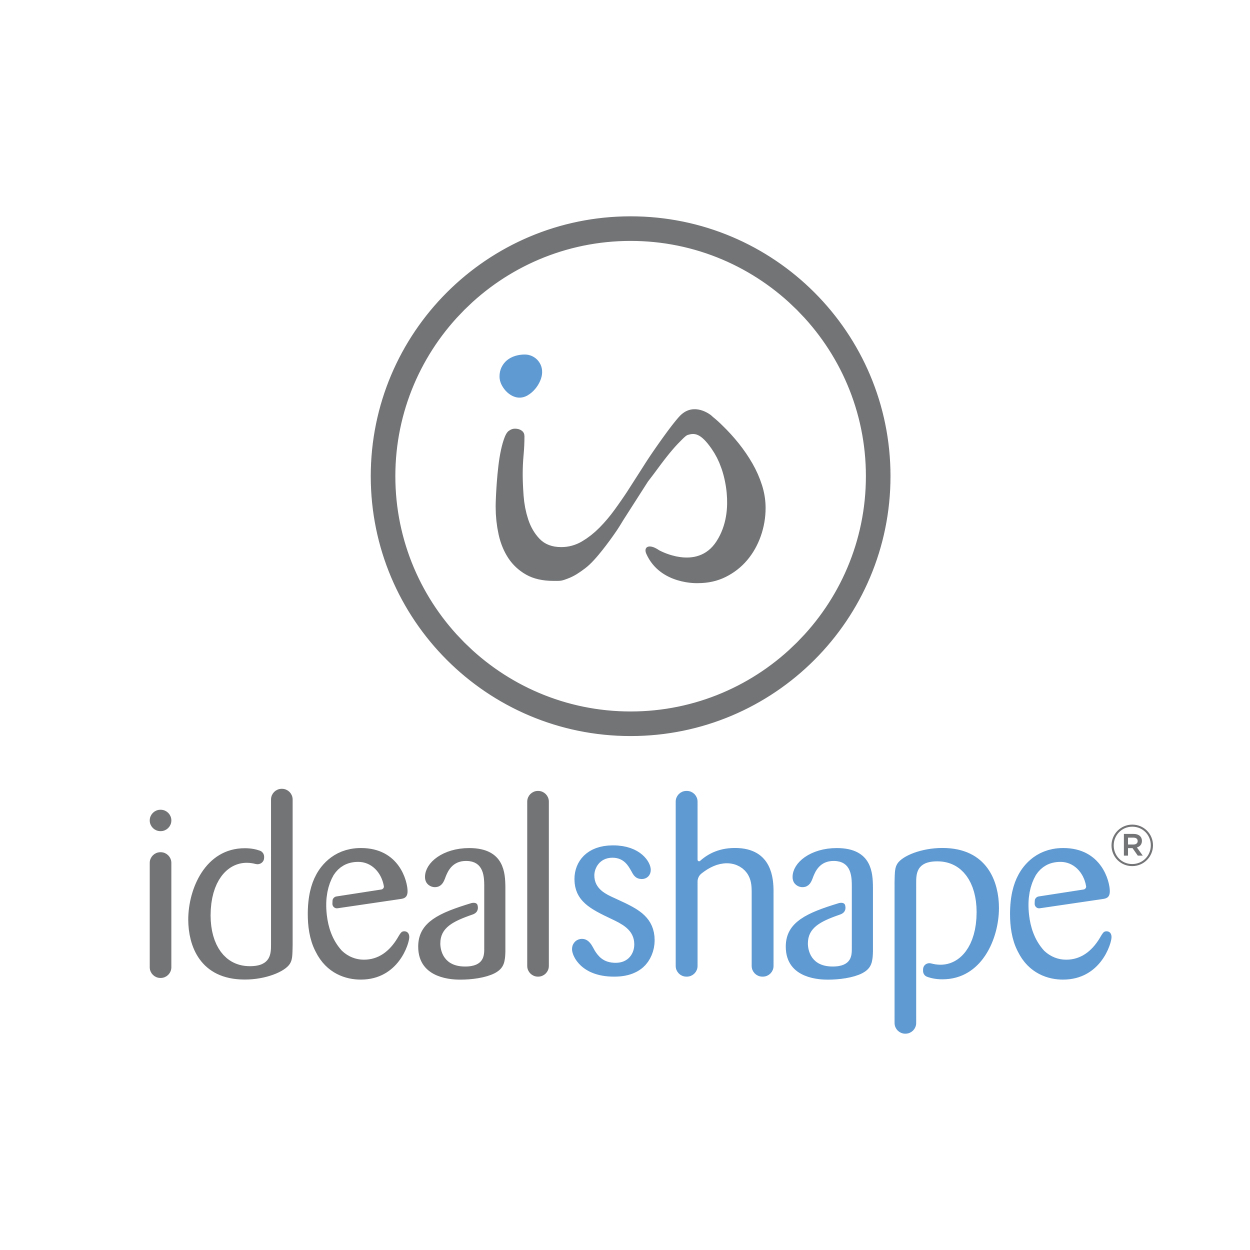 Ideal Shake coupon codes, promo codes and deals